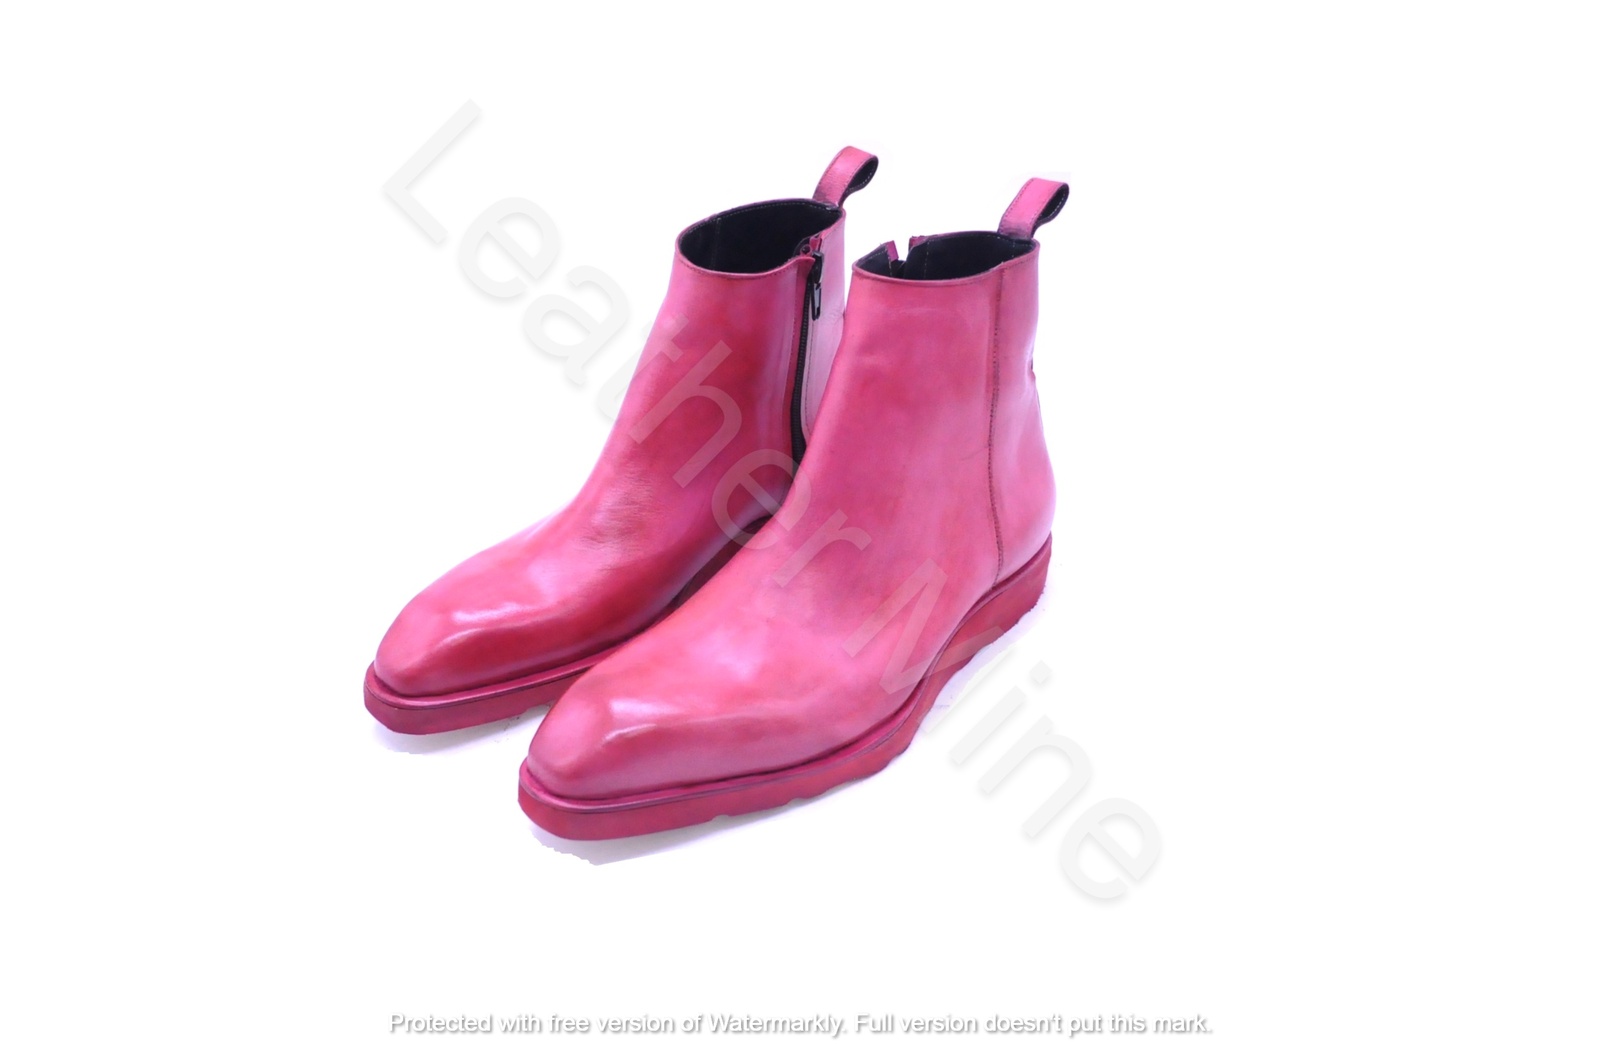 Leather Mine - Men's handmade pink leather ankle high dress boots, custom made formal boots